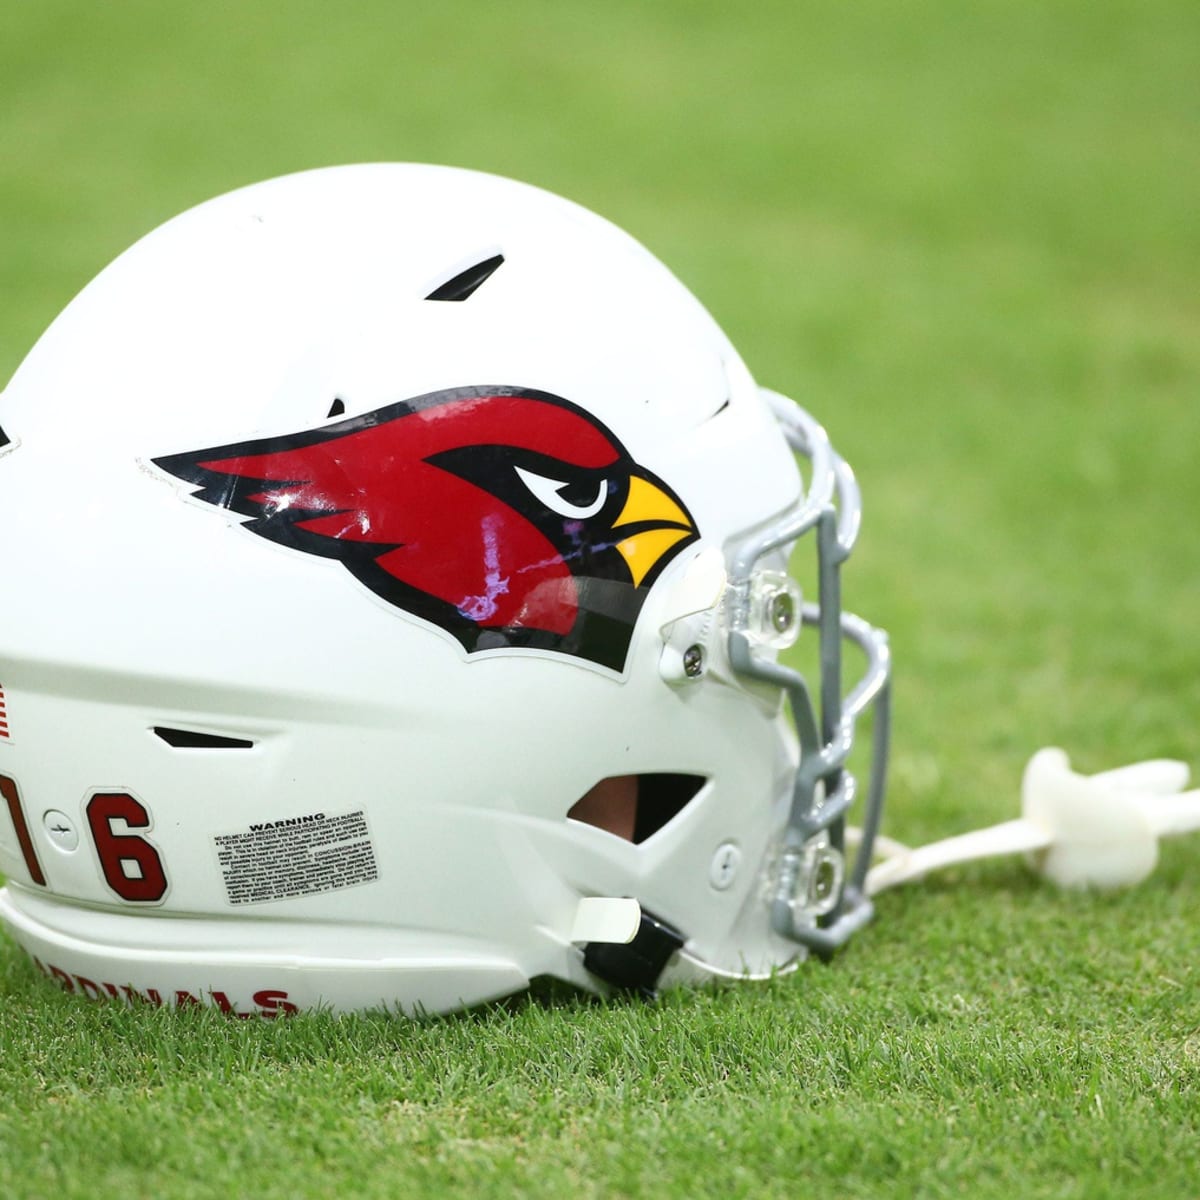 Cardinals unveil new uniforms for first time since 2005